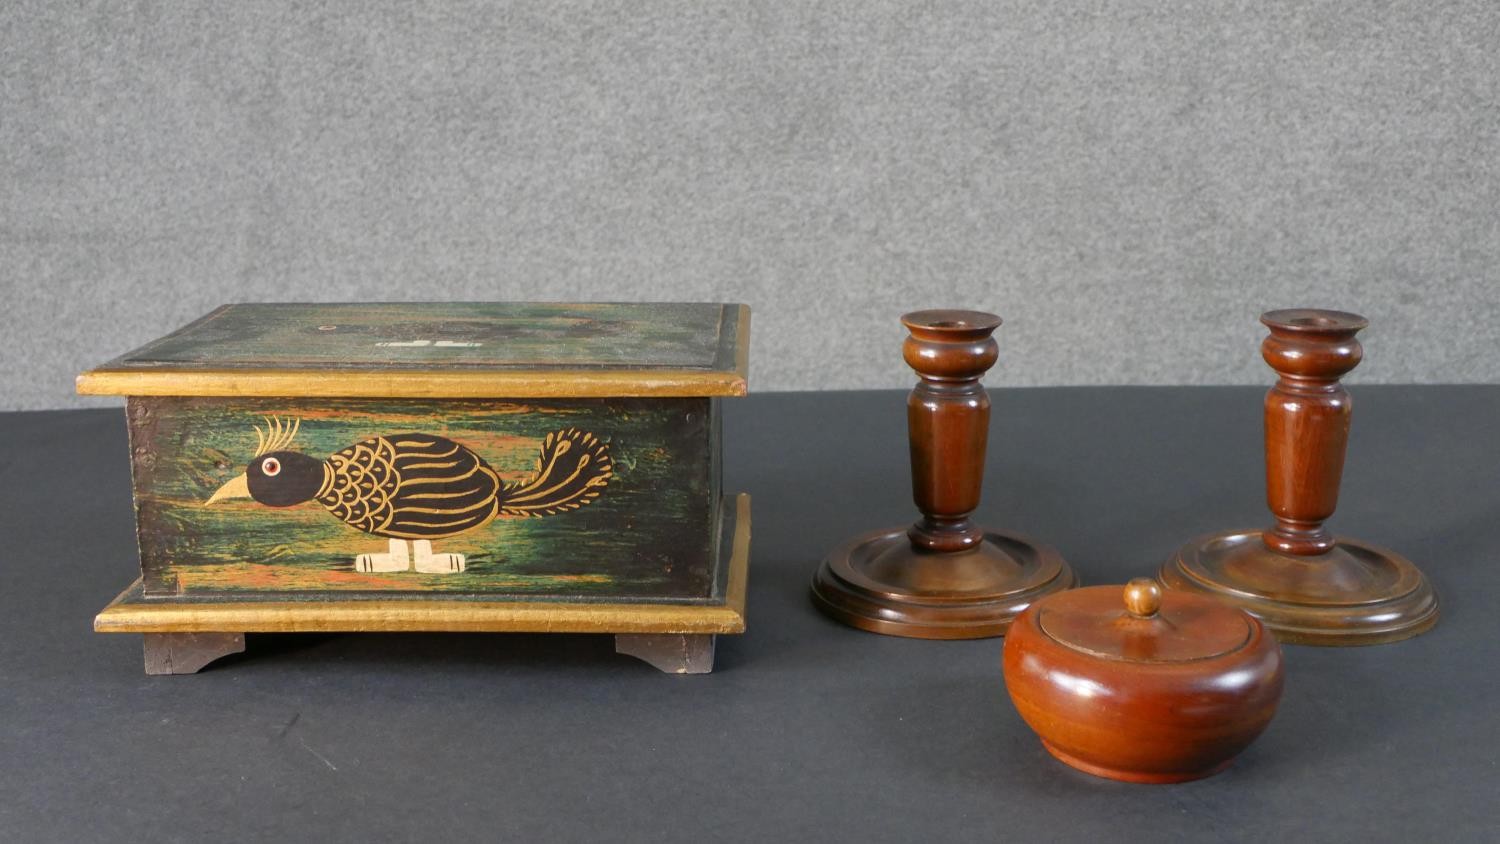 An Indian painted bird jewellery box with fold out mirror and draw along with a pair of turned